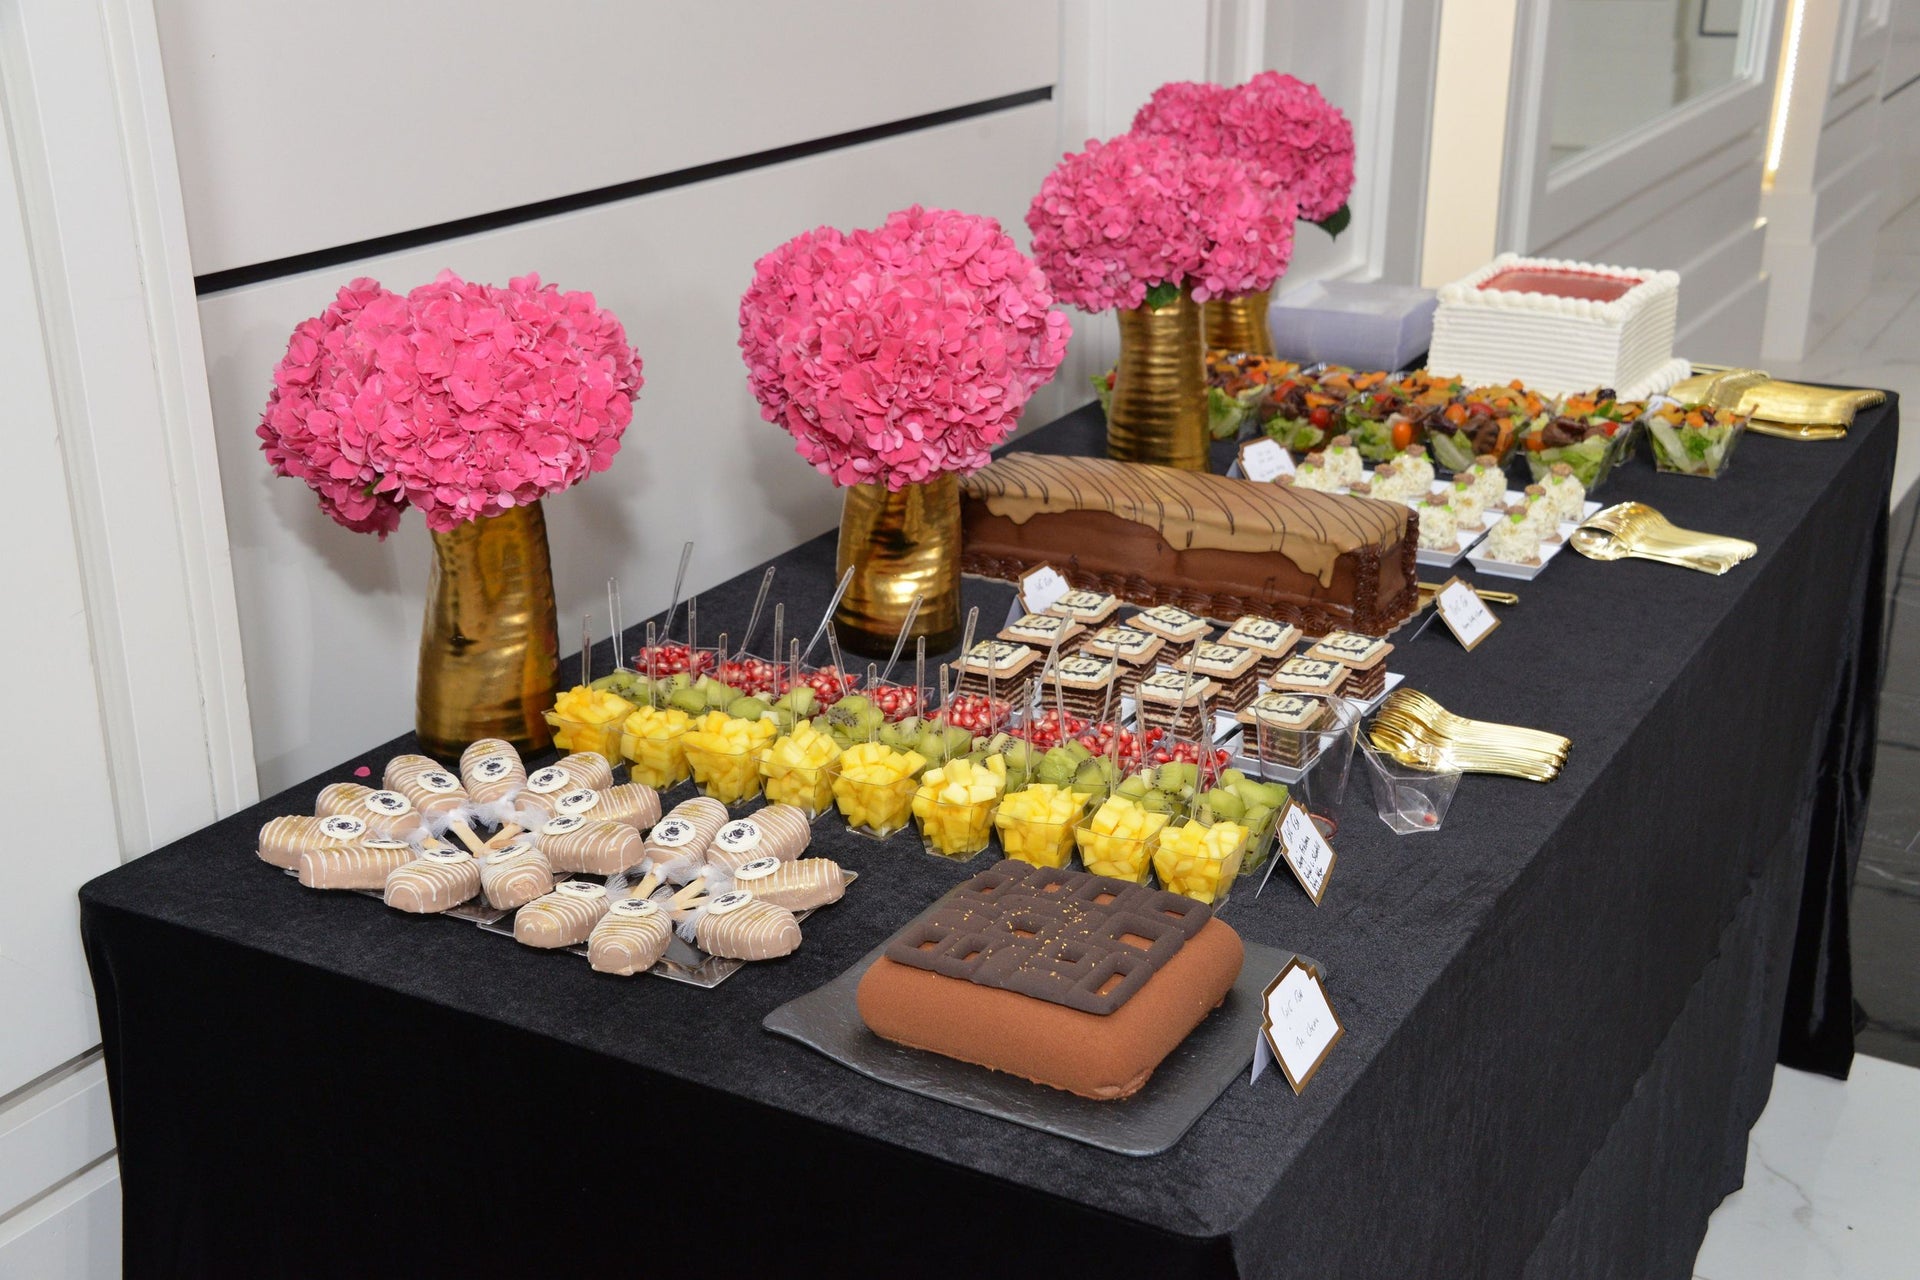 How to Design a Perfect Buffet Table for Your Next Party or Event?